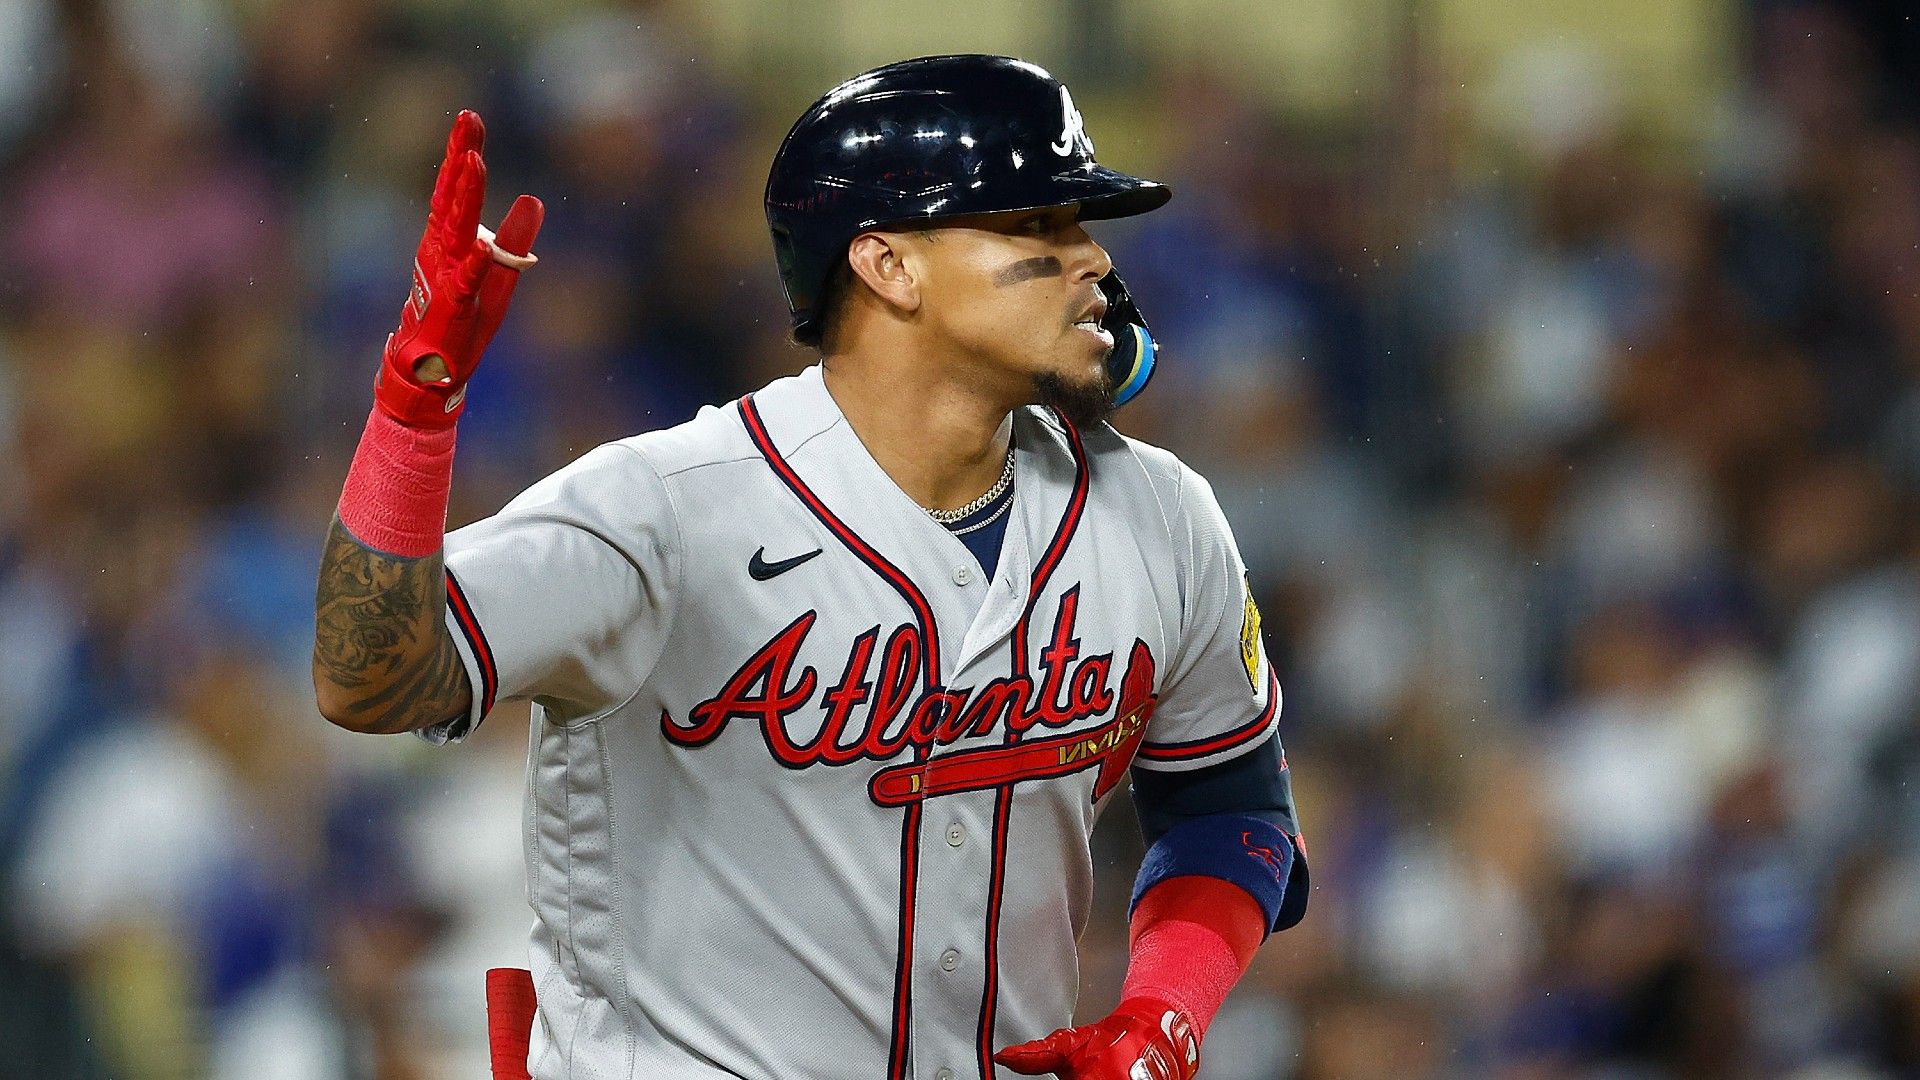 Braves' Orlando Arcia's 3-run homer in 10th secures 6th consecutive win against Dodgers on Saturday